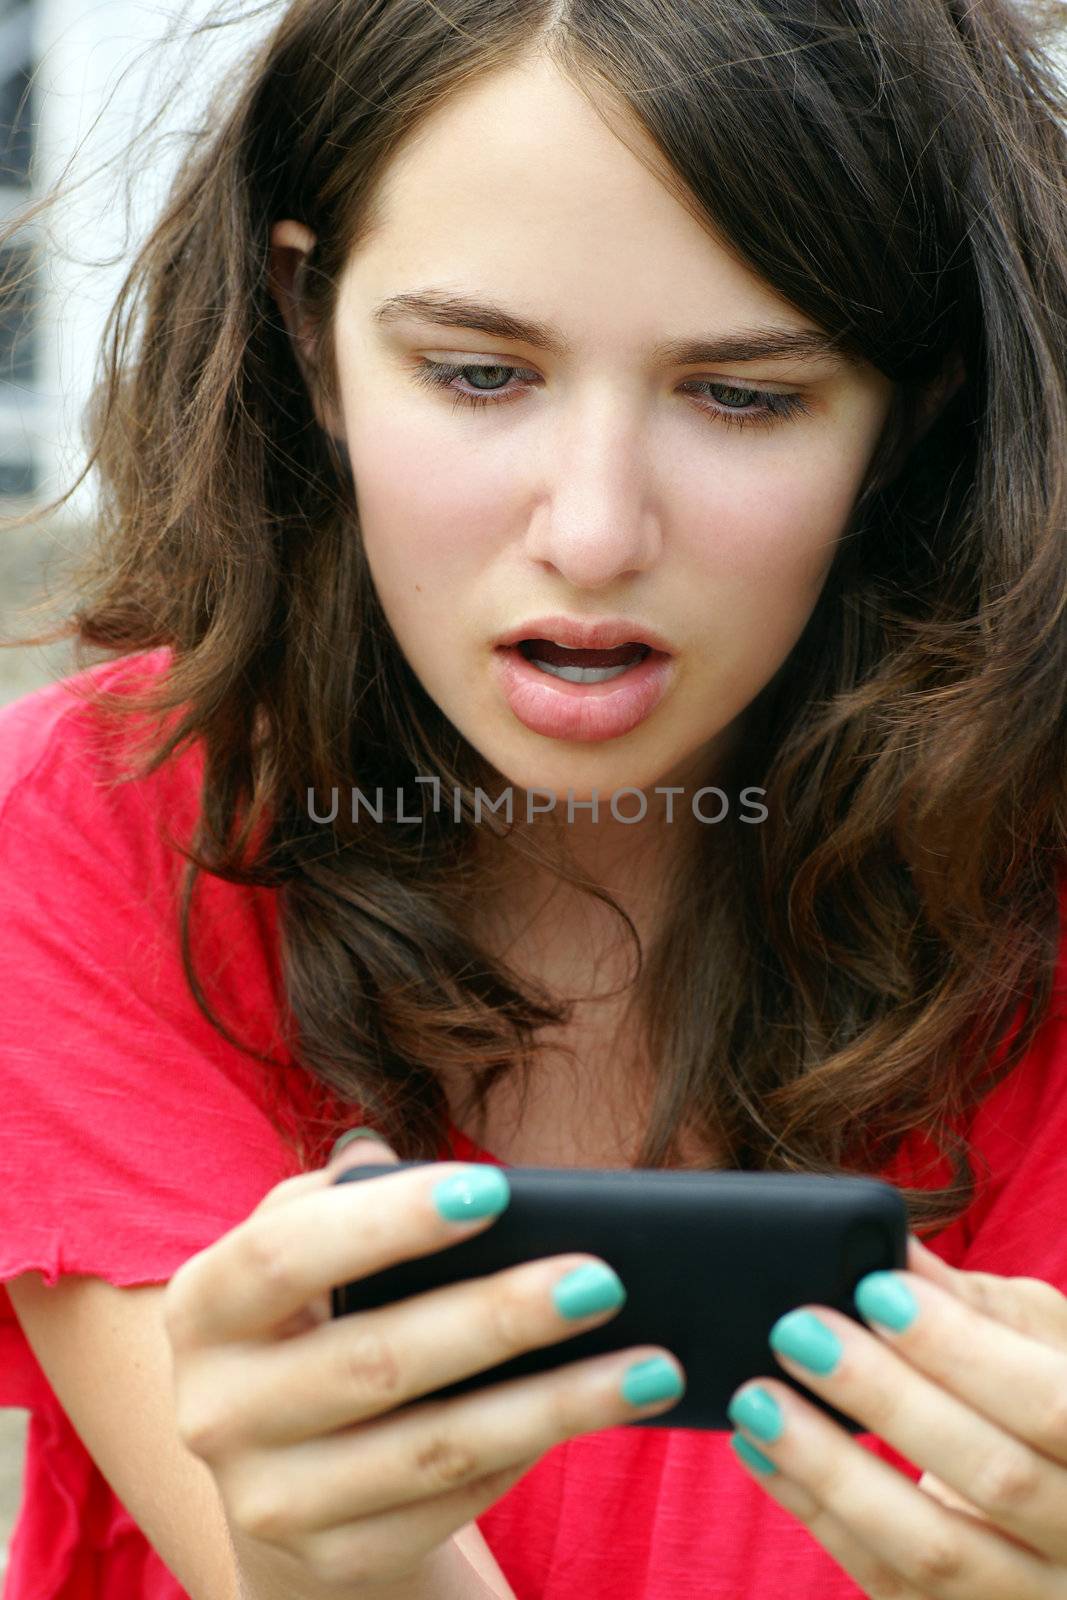 Girl in disbelief over mobile or cell phone text by Mirage3